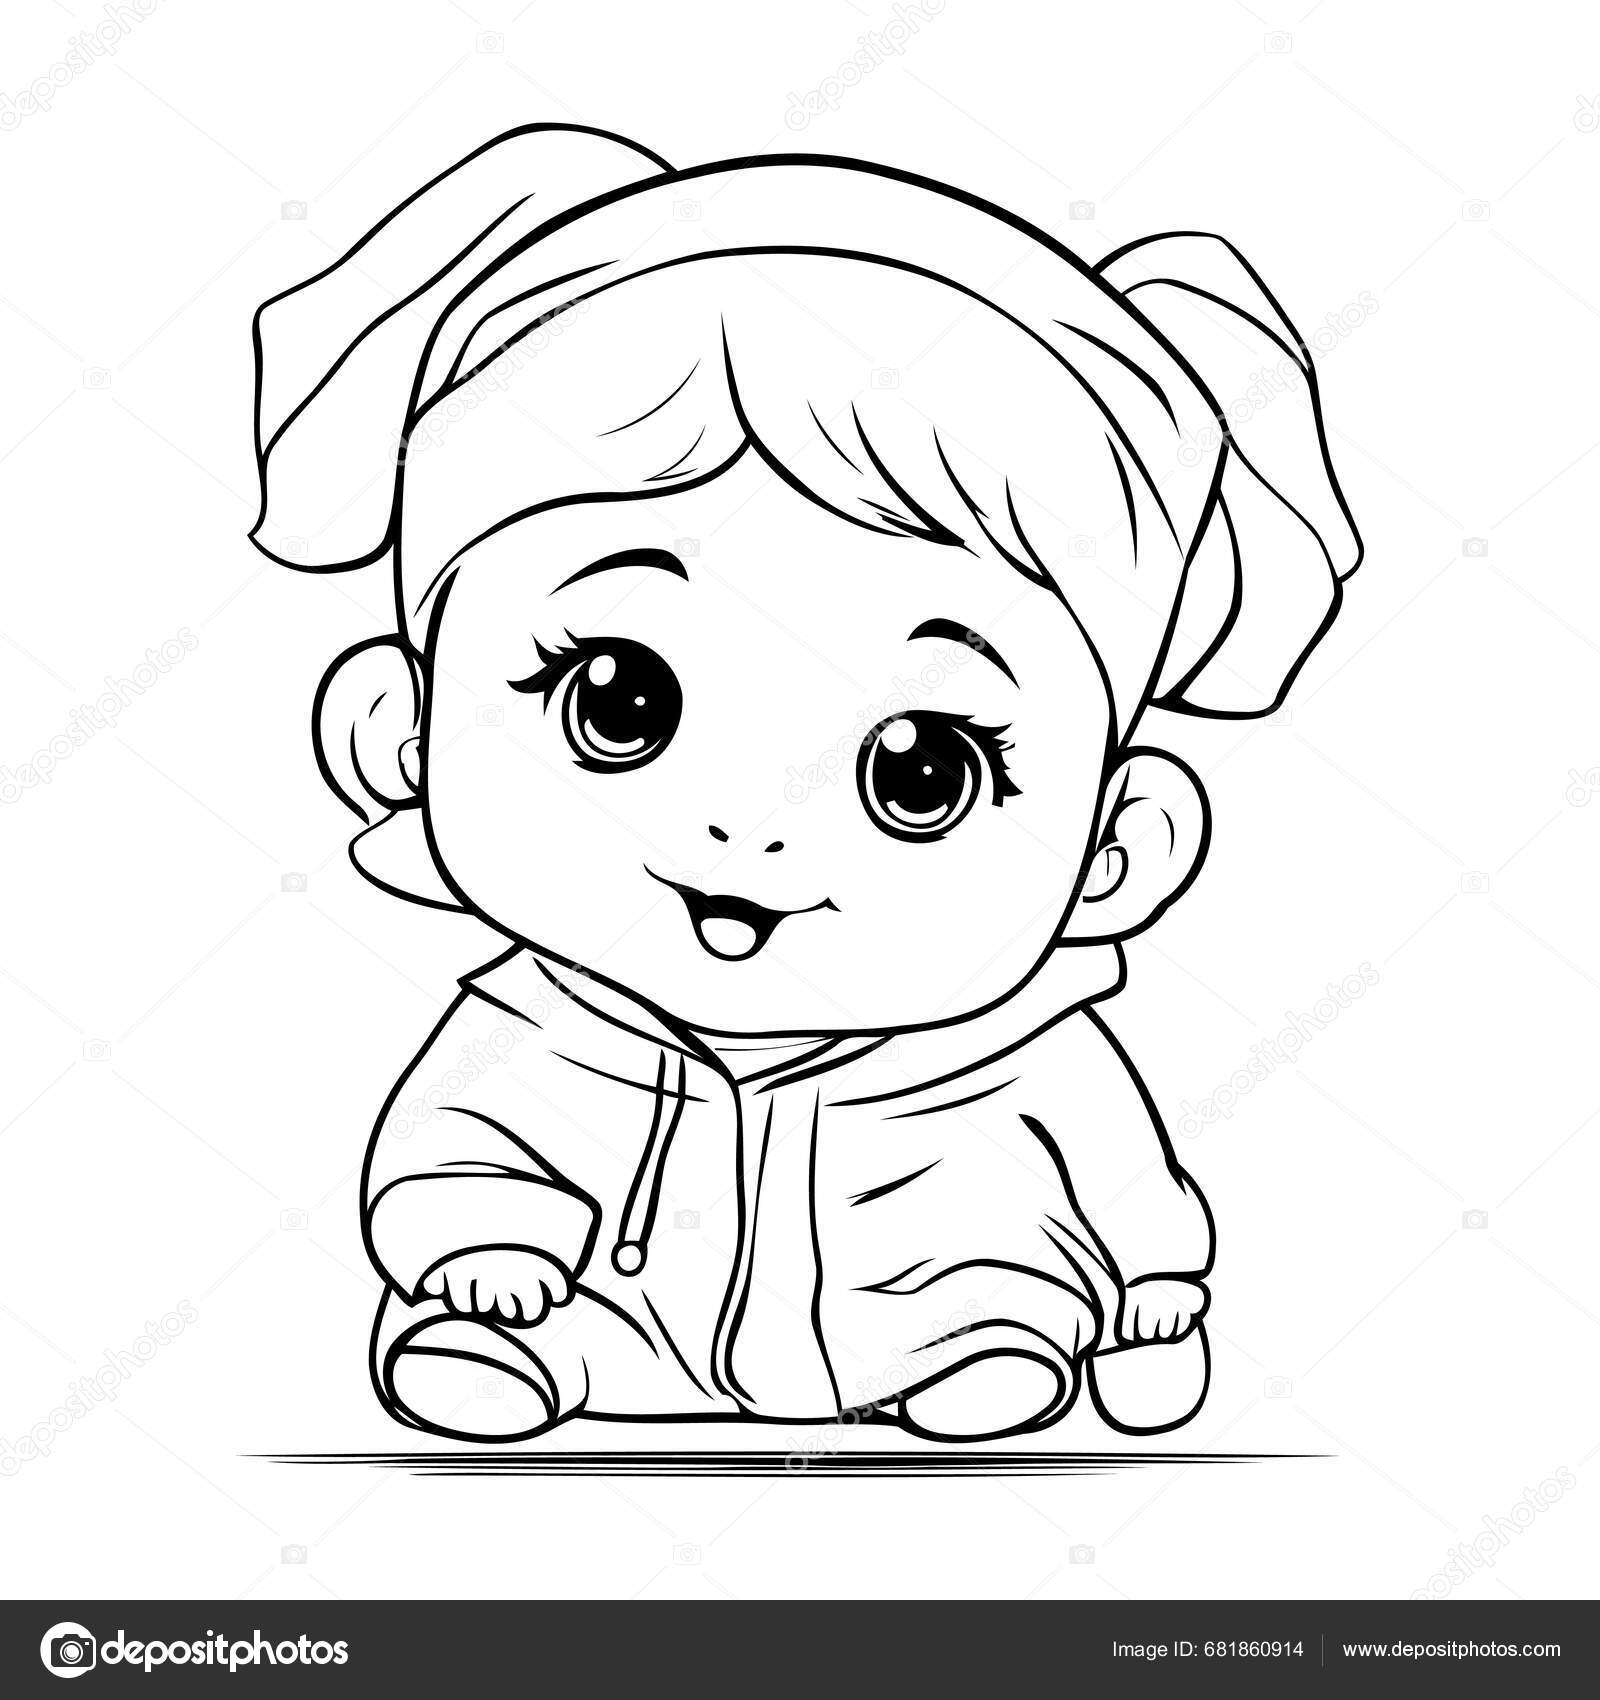 How to Draw a Baby - Really Easy Drawing Tutorial